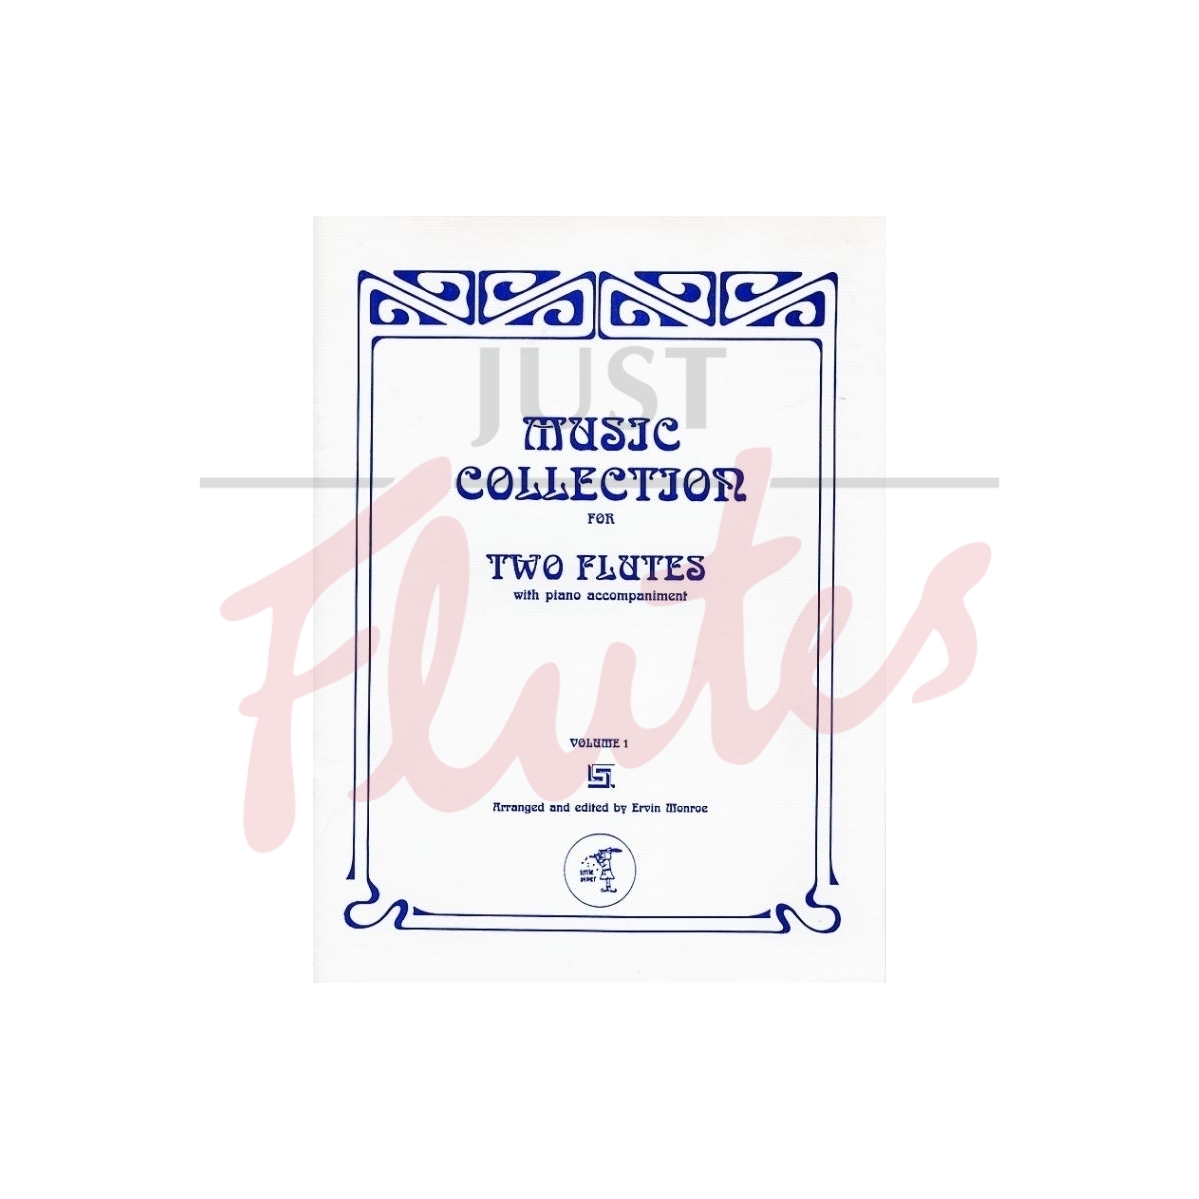 Music Collection for Two Flutes and Piano, Vol 1